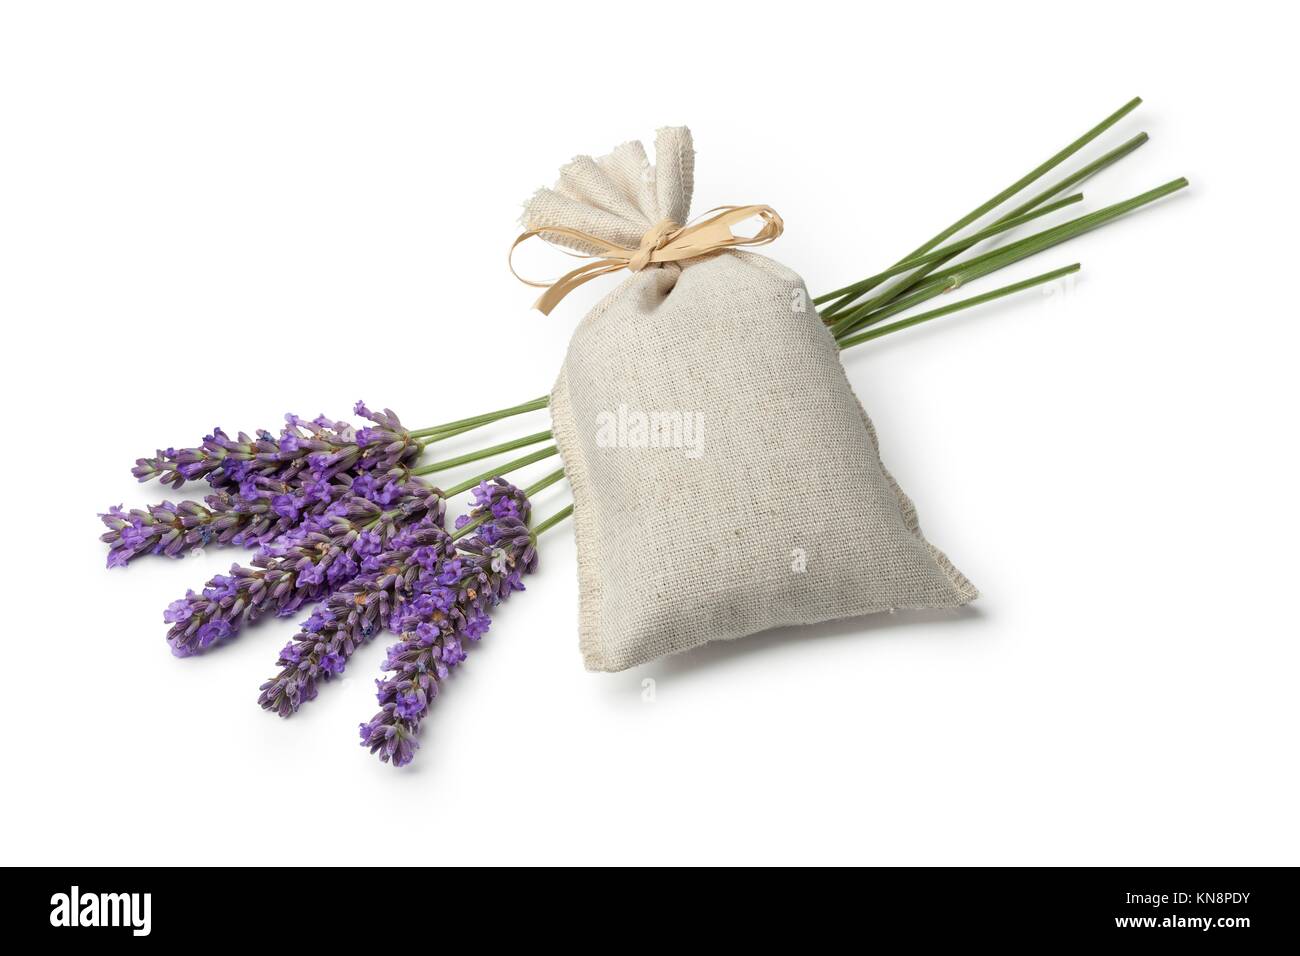 Linen sack with dried lavender flowers and fresh lavender on white background. Stock Photo